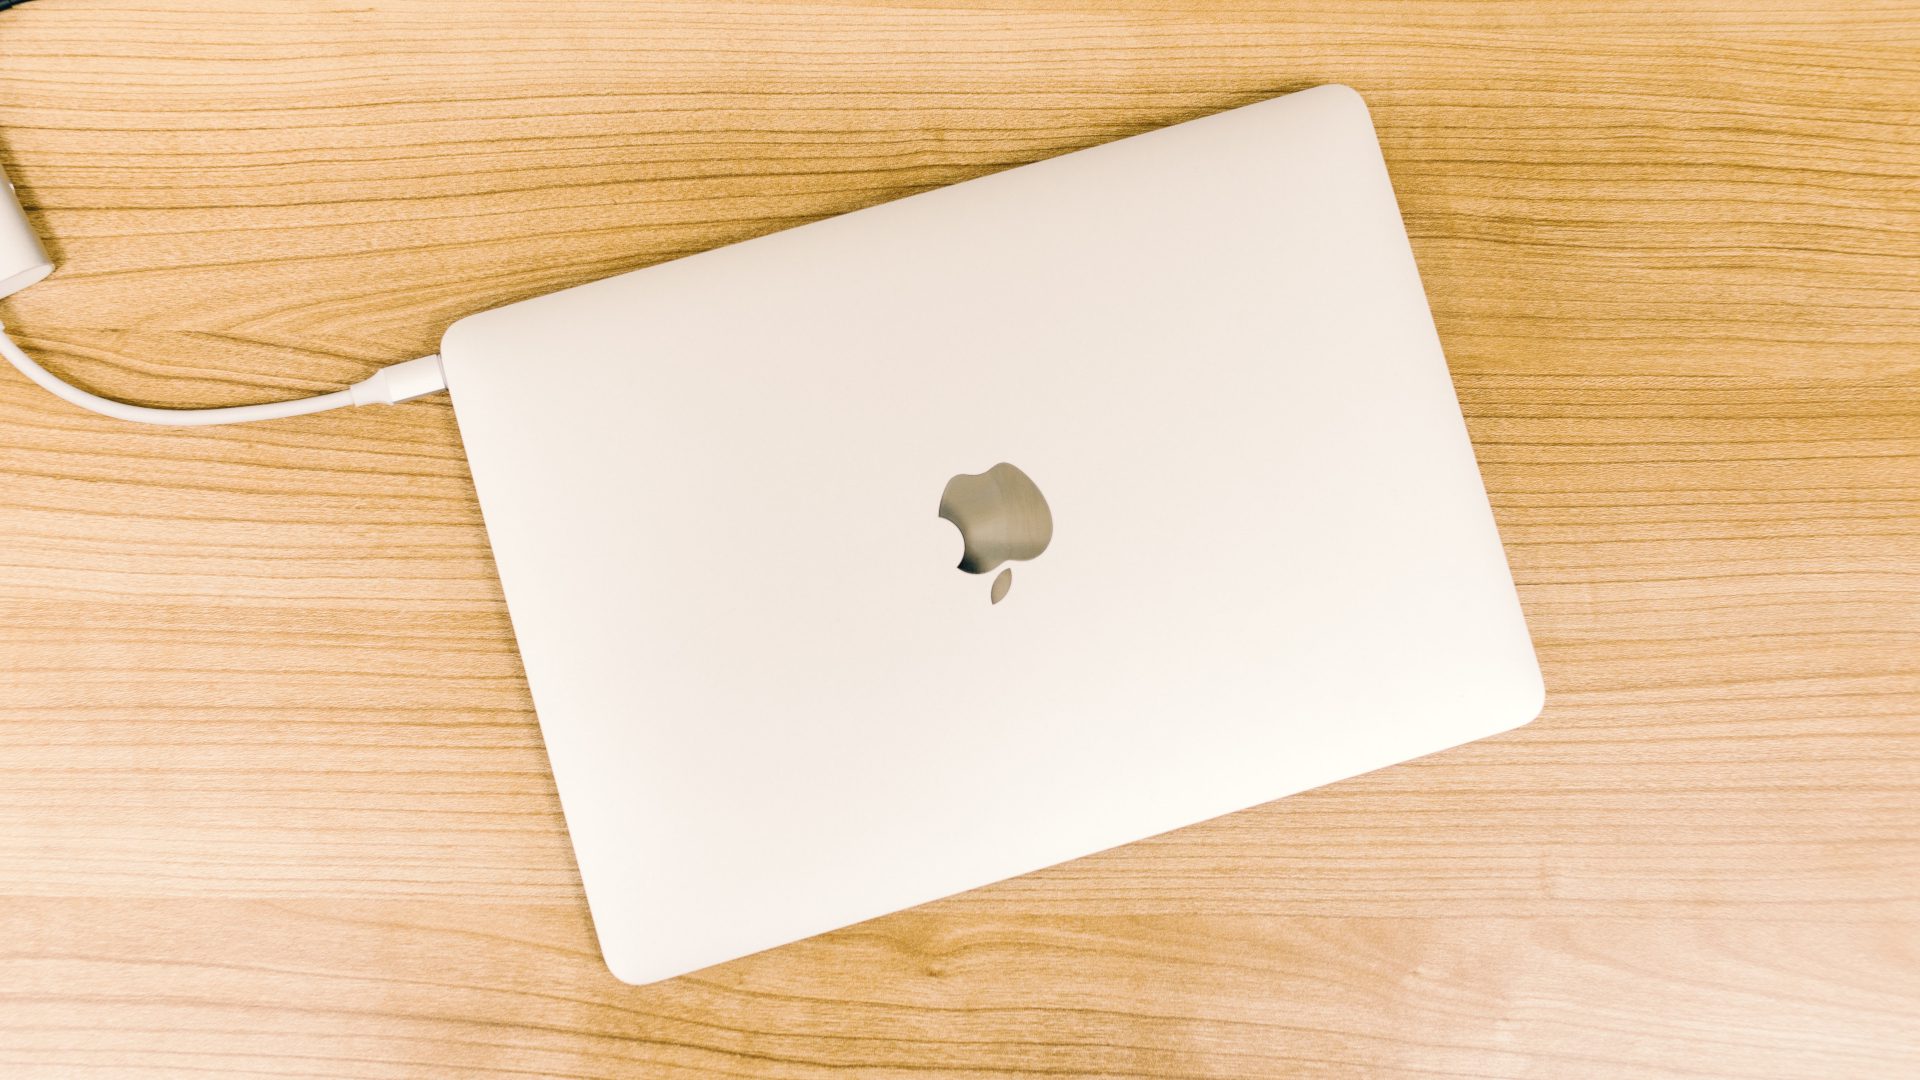 MacBook with closed lid